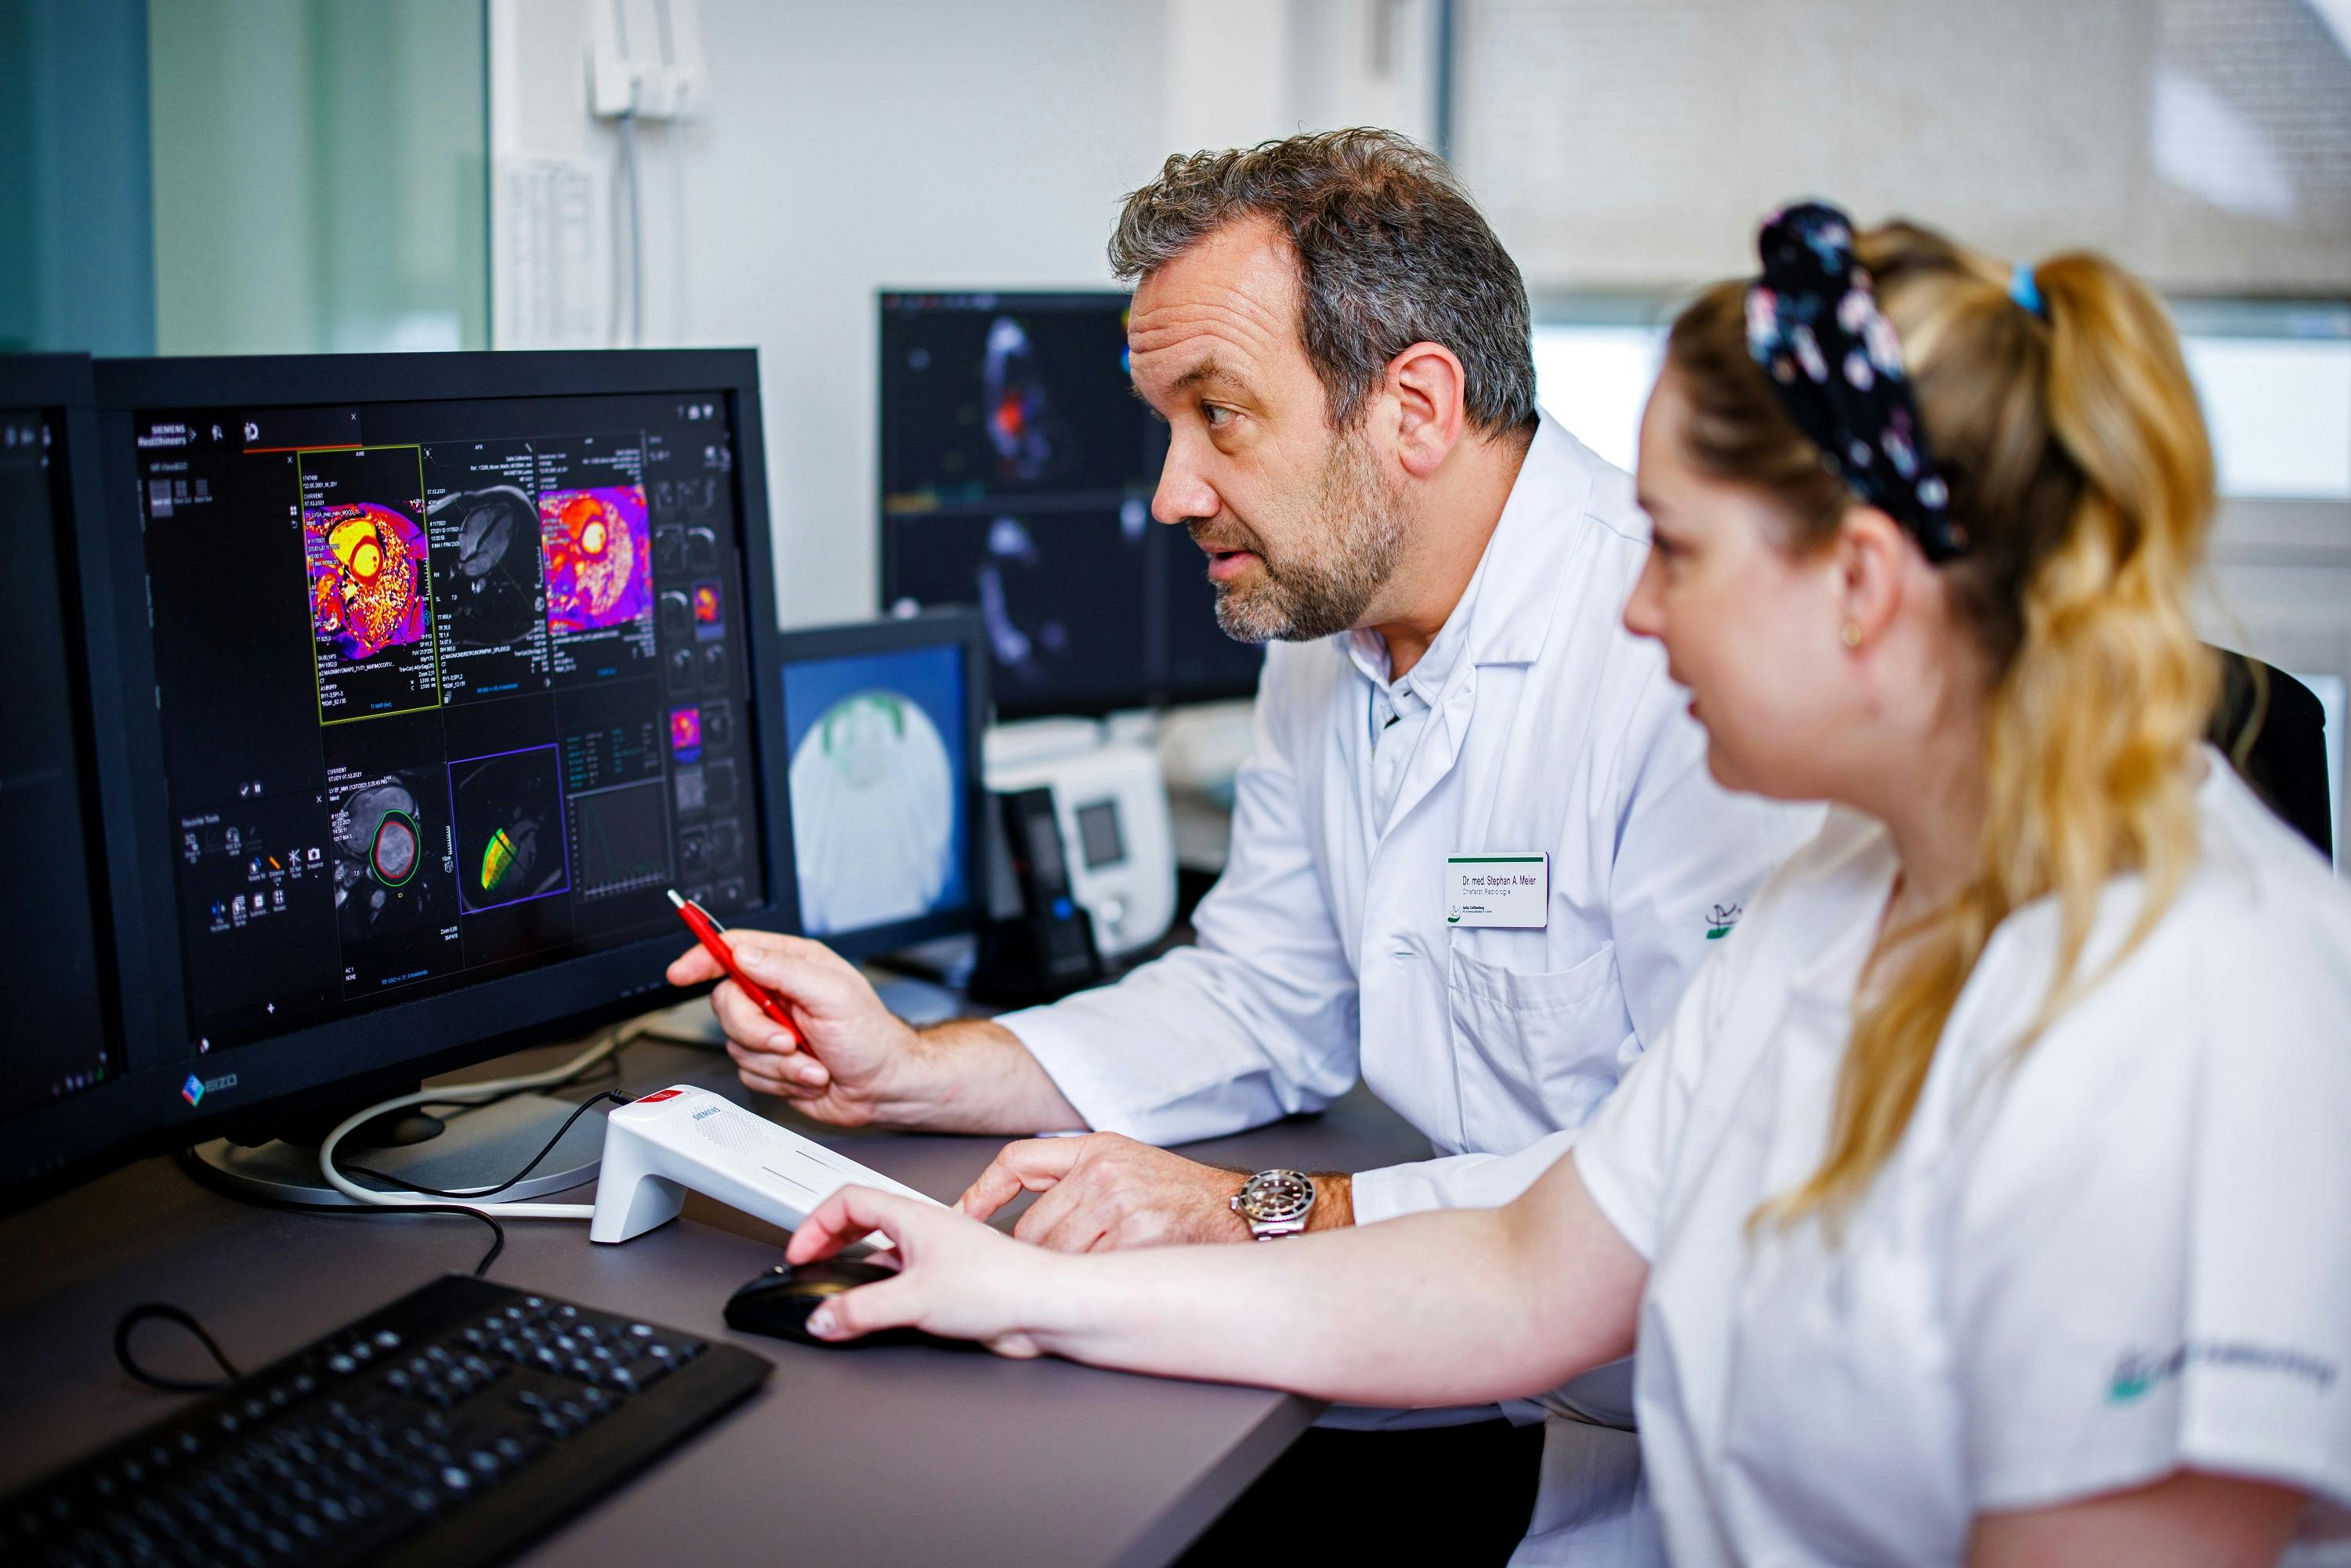 Two doctors analyse cardiac imaging data on computer screens.